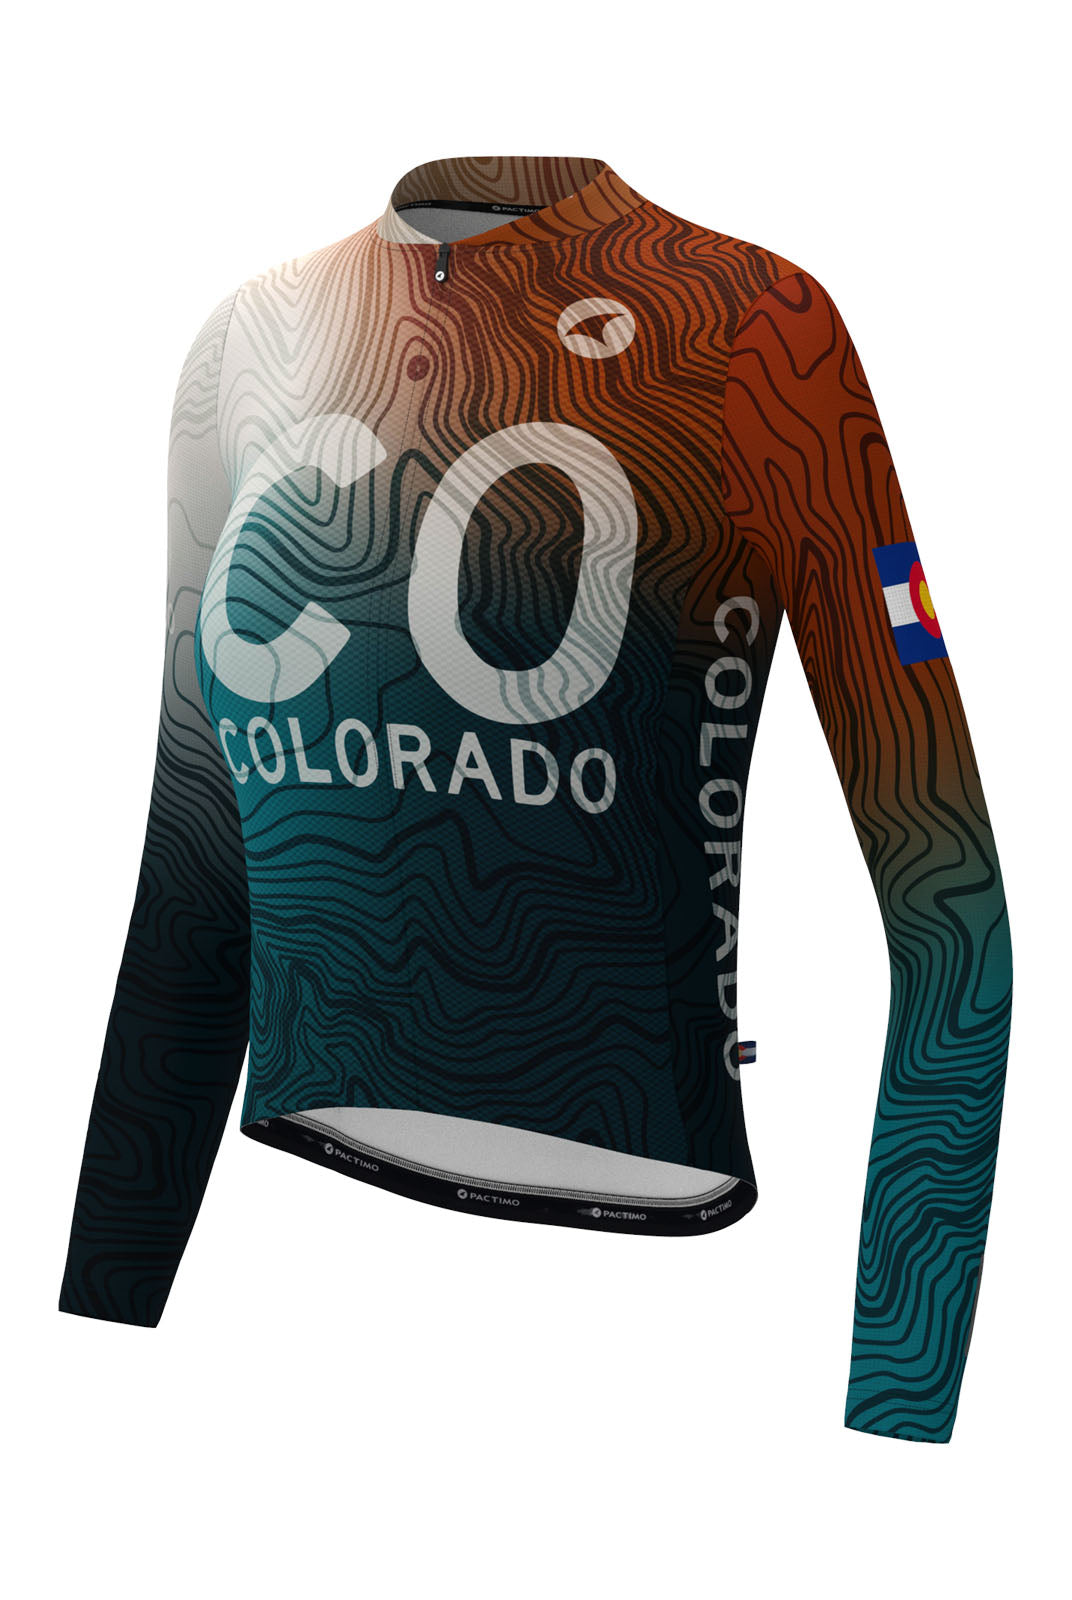 Women's Colorado Geo Long Sleeve Cycling Jersey - Ascent Aero Front View